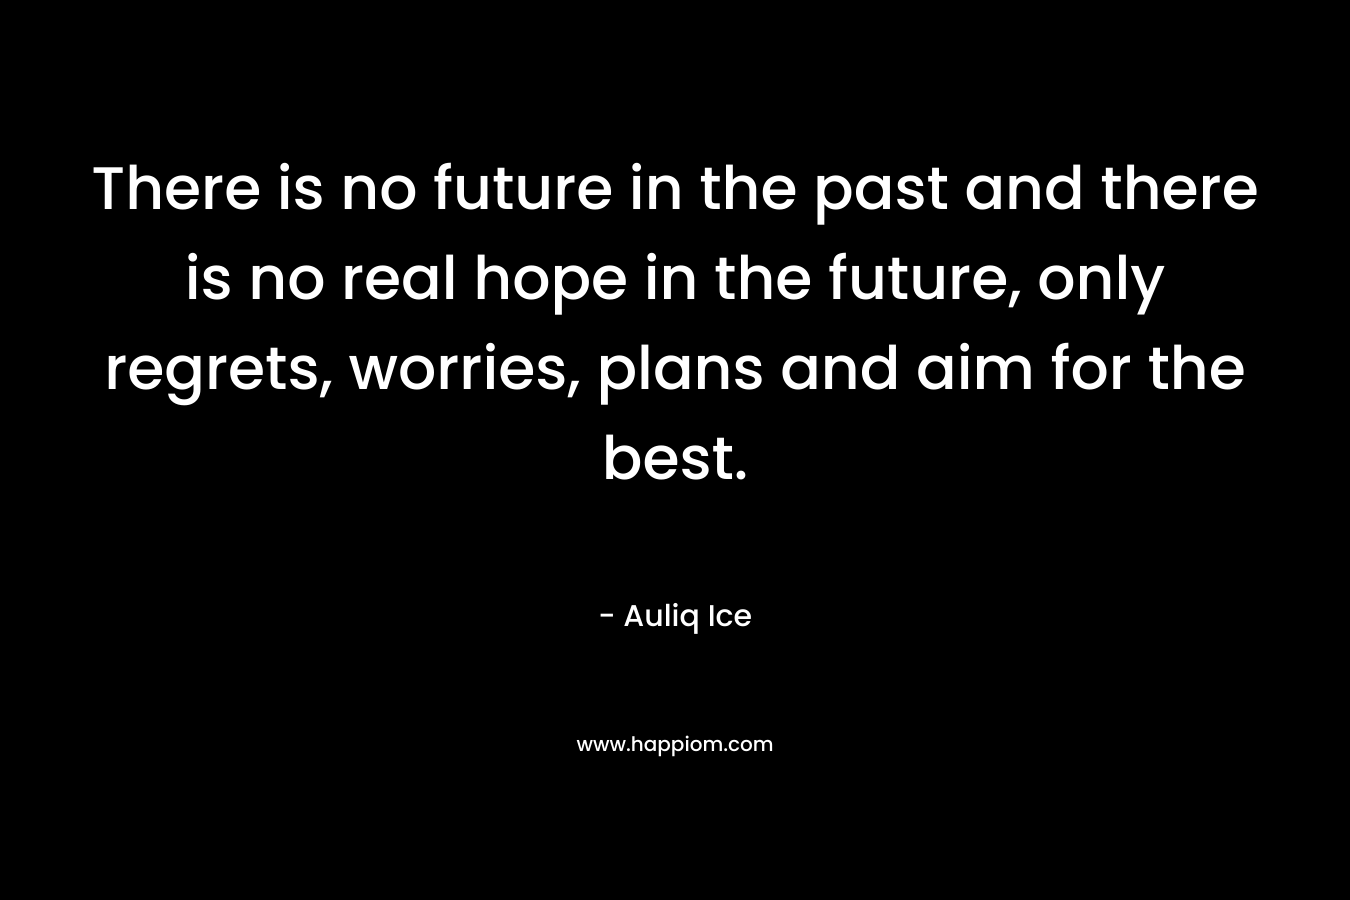 There is no future in the past and there is no real hope in the future, only regrets, worries, plans and aim for the best.